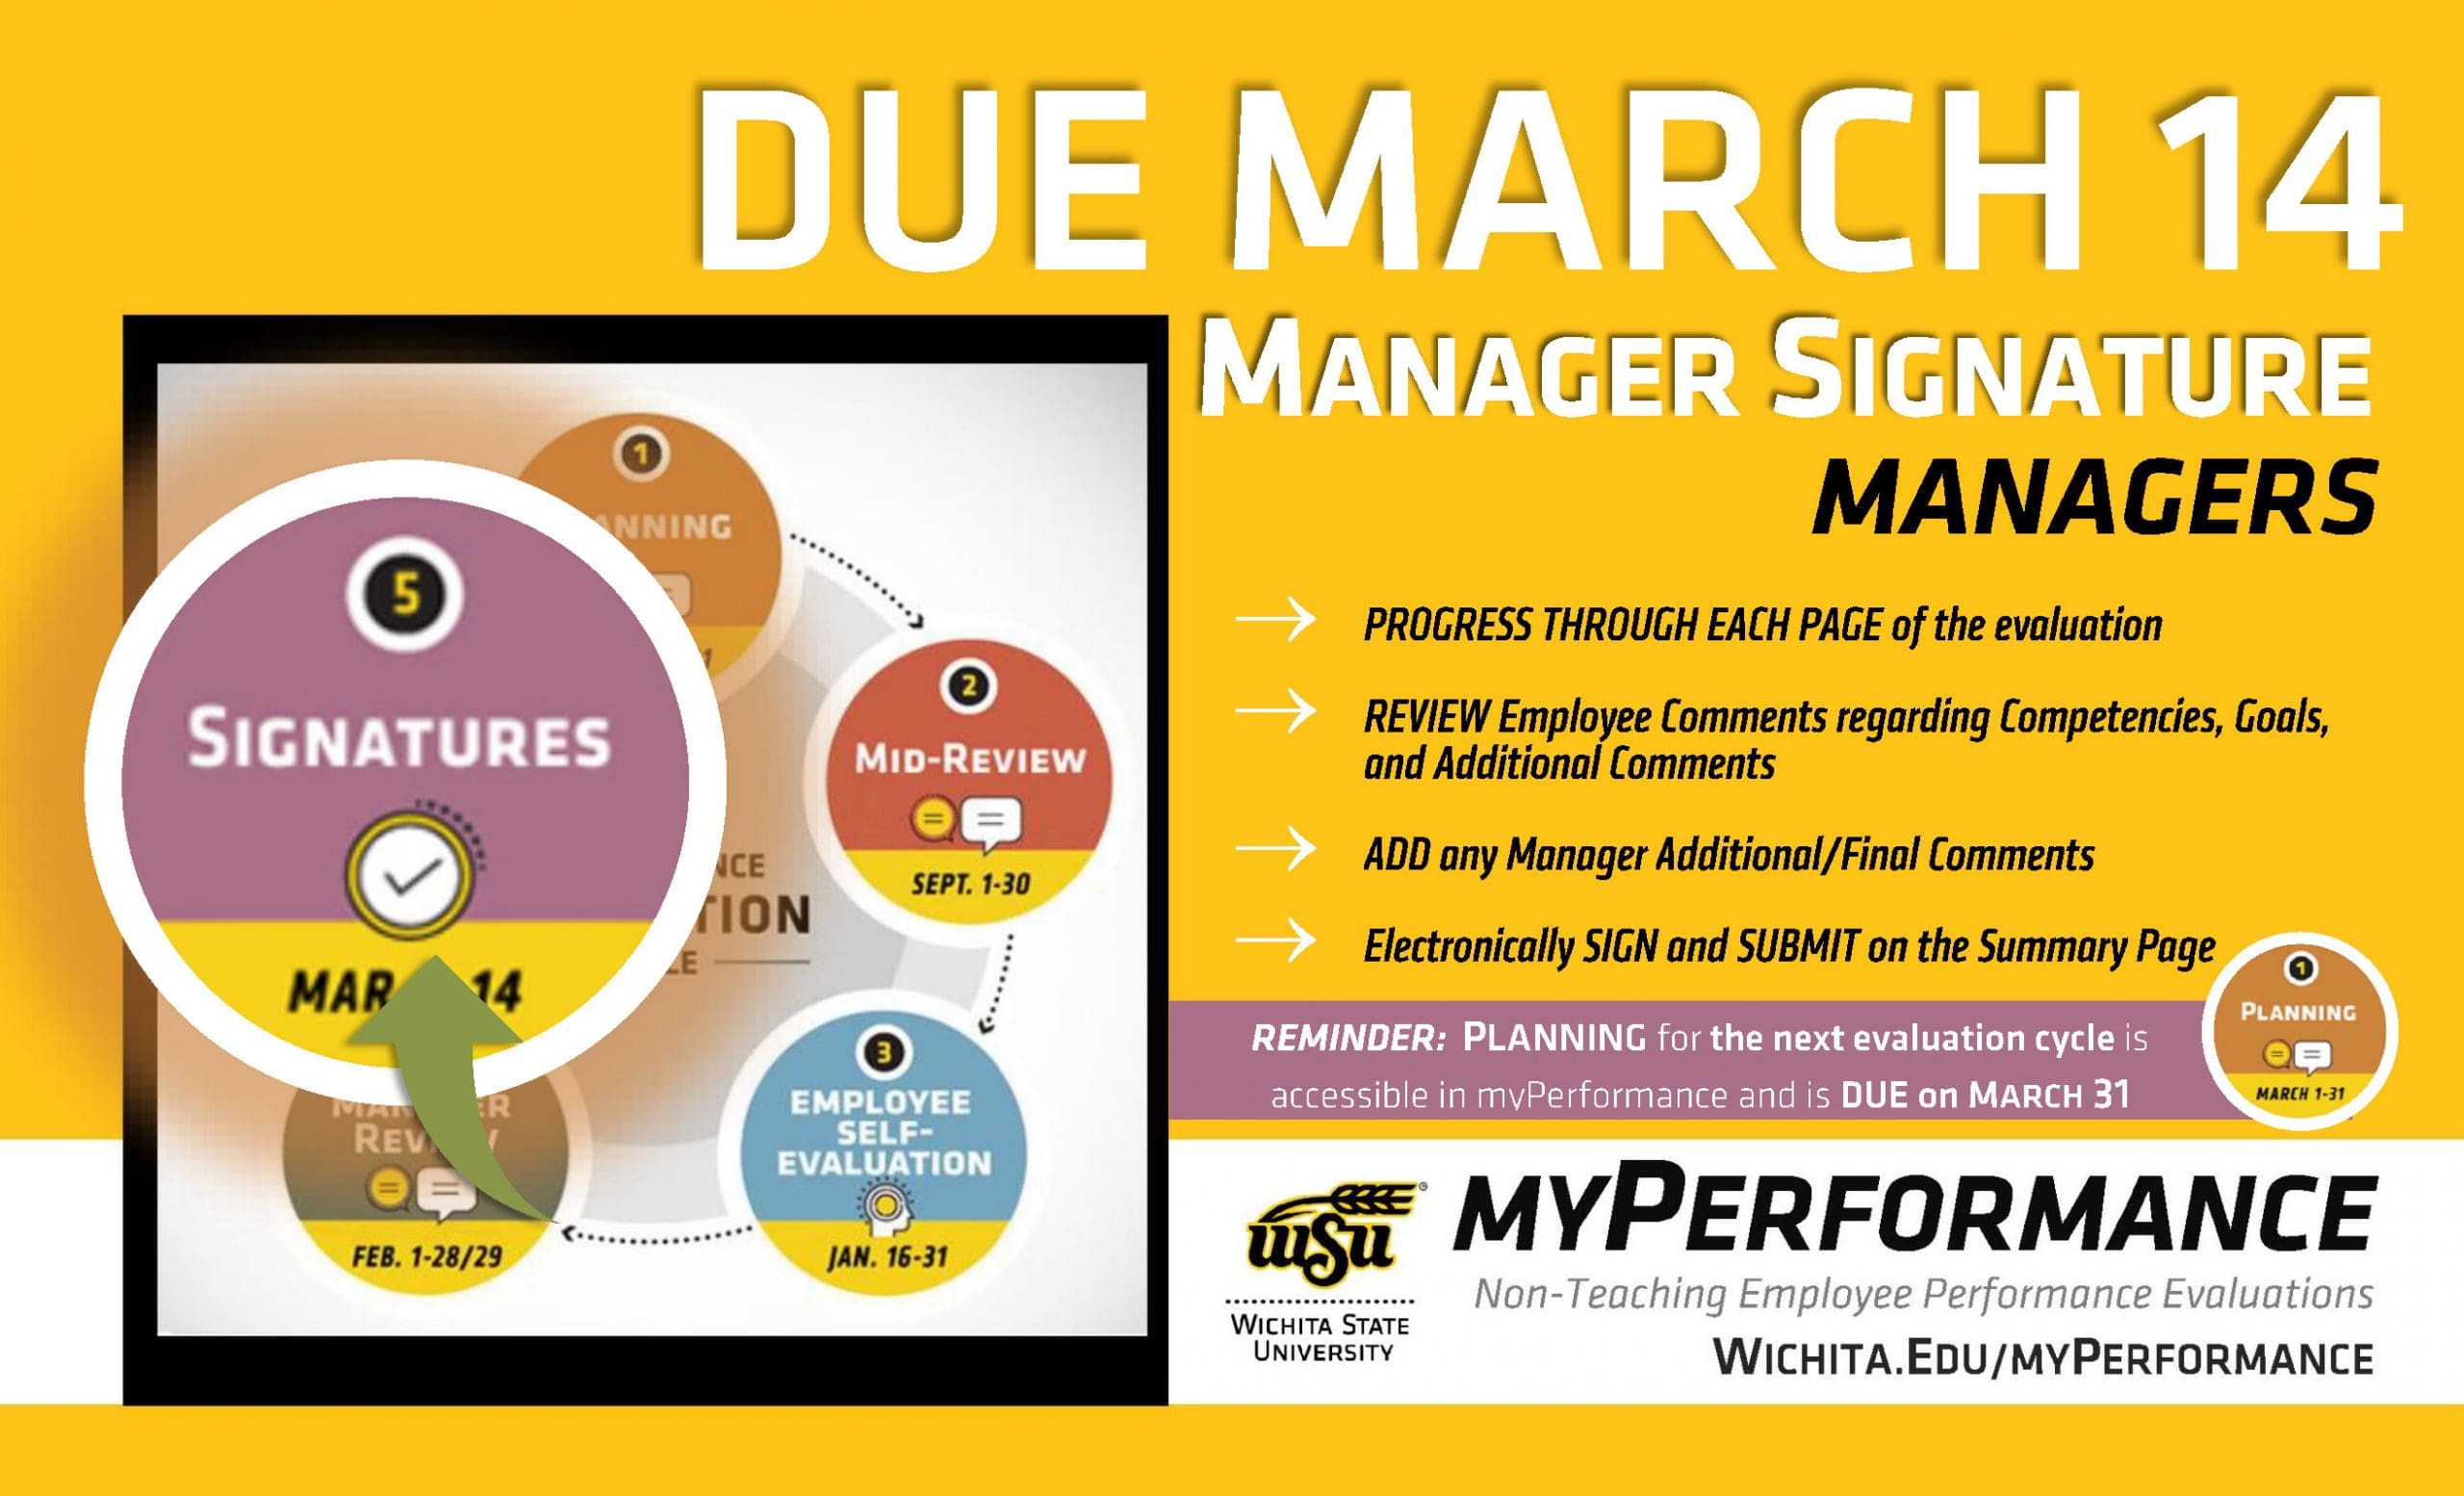 Graphic of the myPerformance Evaluation Cycle highlighting the Signature Step. Alt Text: Due March 14: Manager Signature. Managers: Progress through each page of the evaluation, Review employee comments regarding competencies, goals and additional comments, Add any Manager Additional/Final Comments, Electronically Sign and Submit on the Summary Page. Planning March 1-31: Reminder: Planning for the next evaluation cycle is accessible in myPerformance and is due on March 31. Wichita State University. myPerformance: Non-Teaching Employee Performance Evaluations. wichita.edu/myPerformance